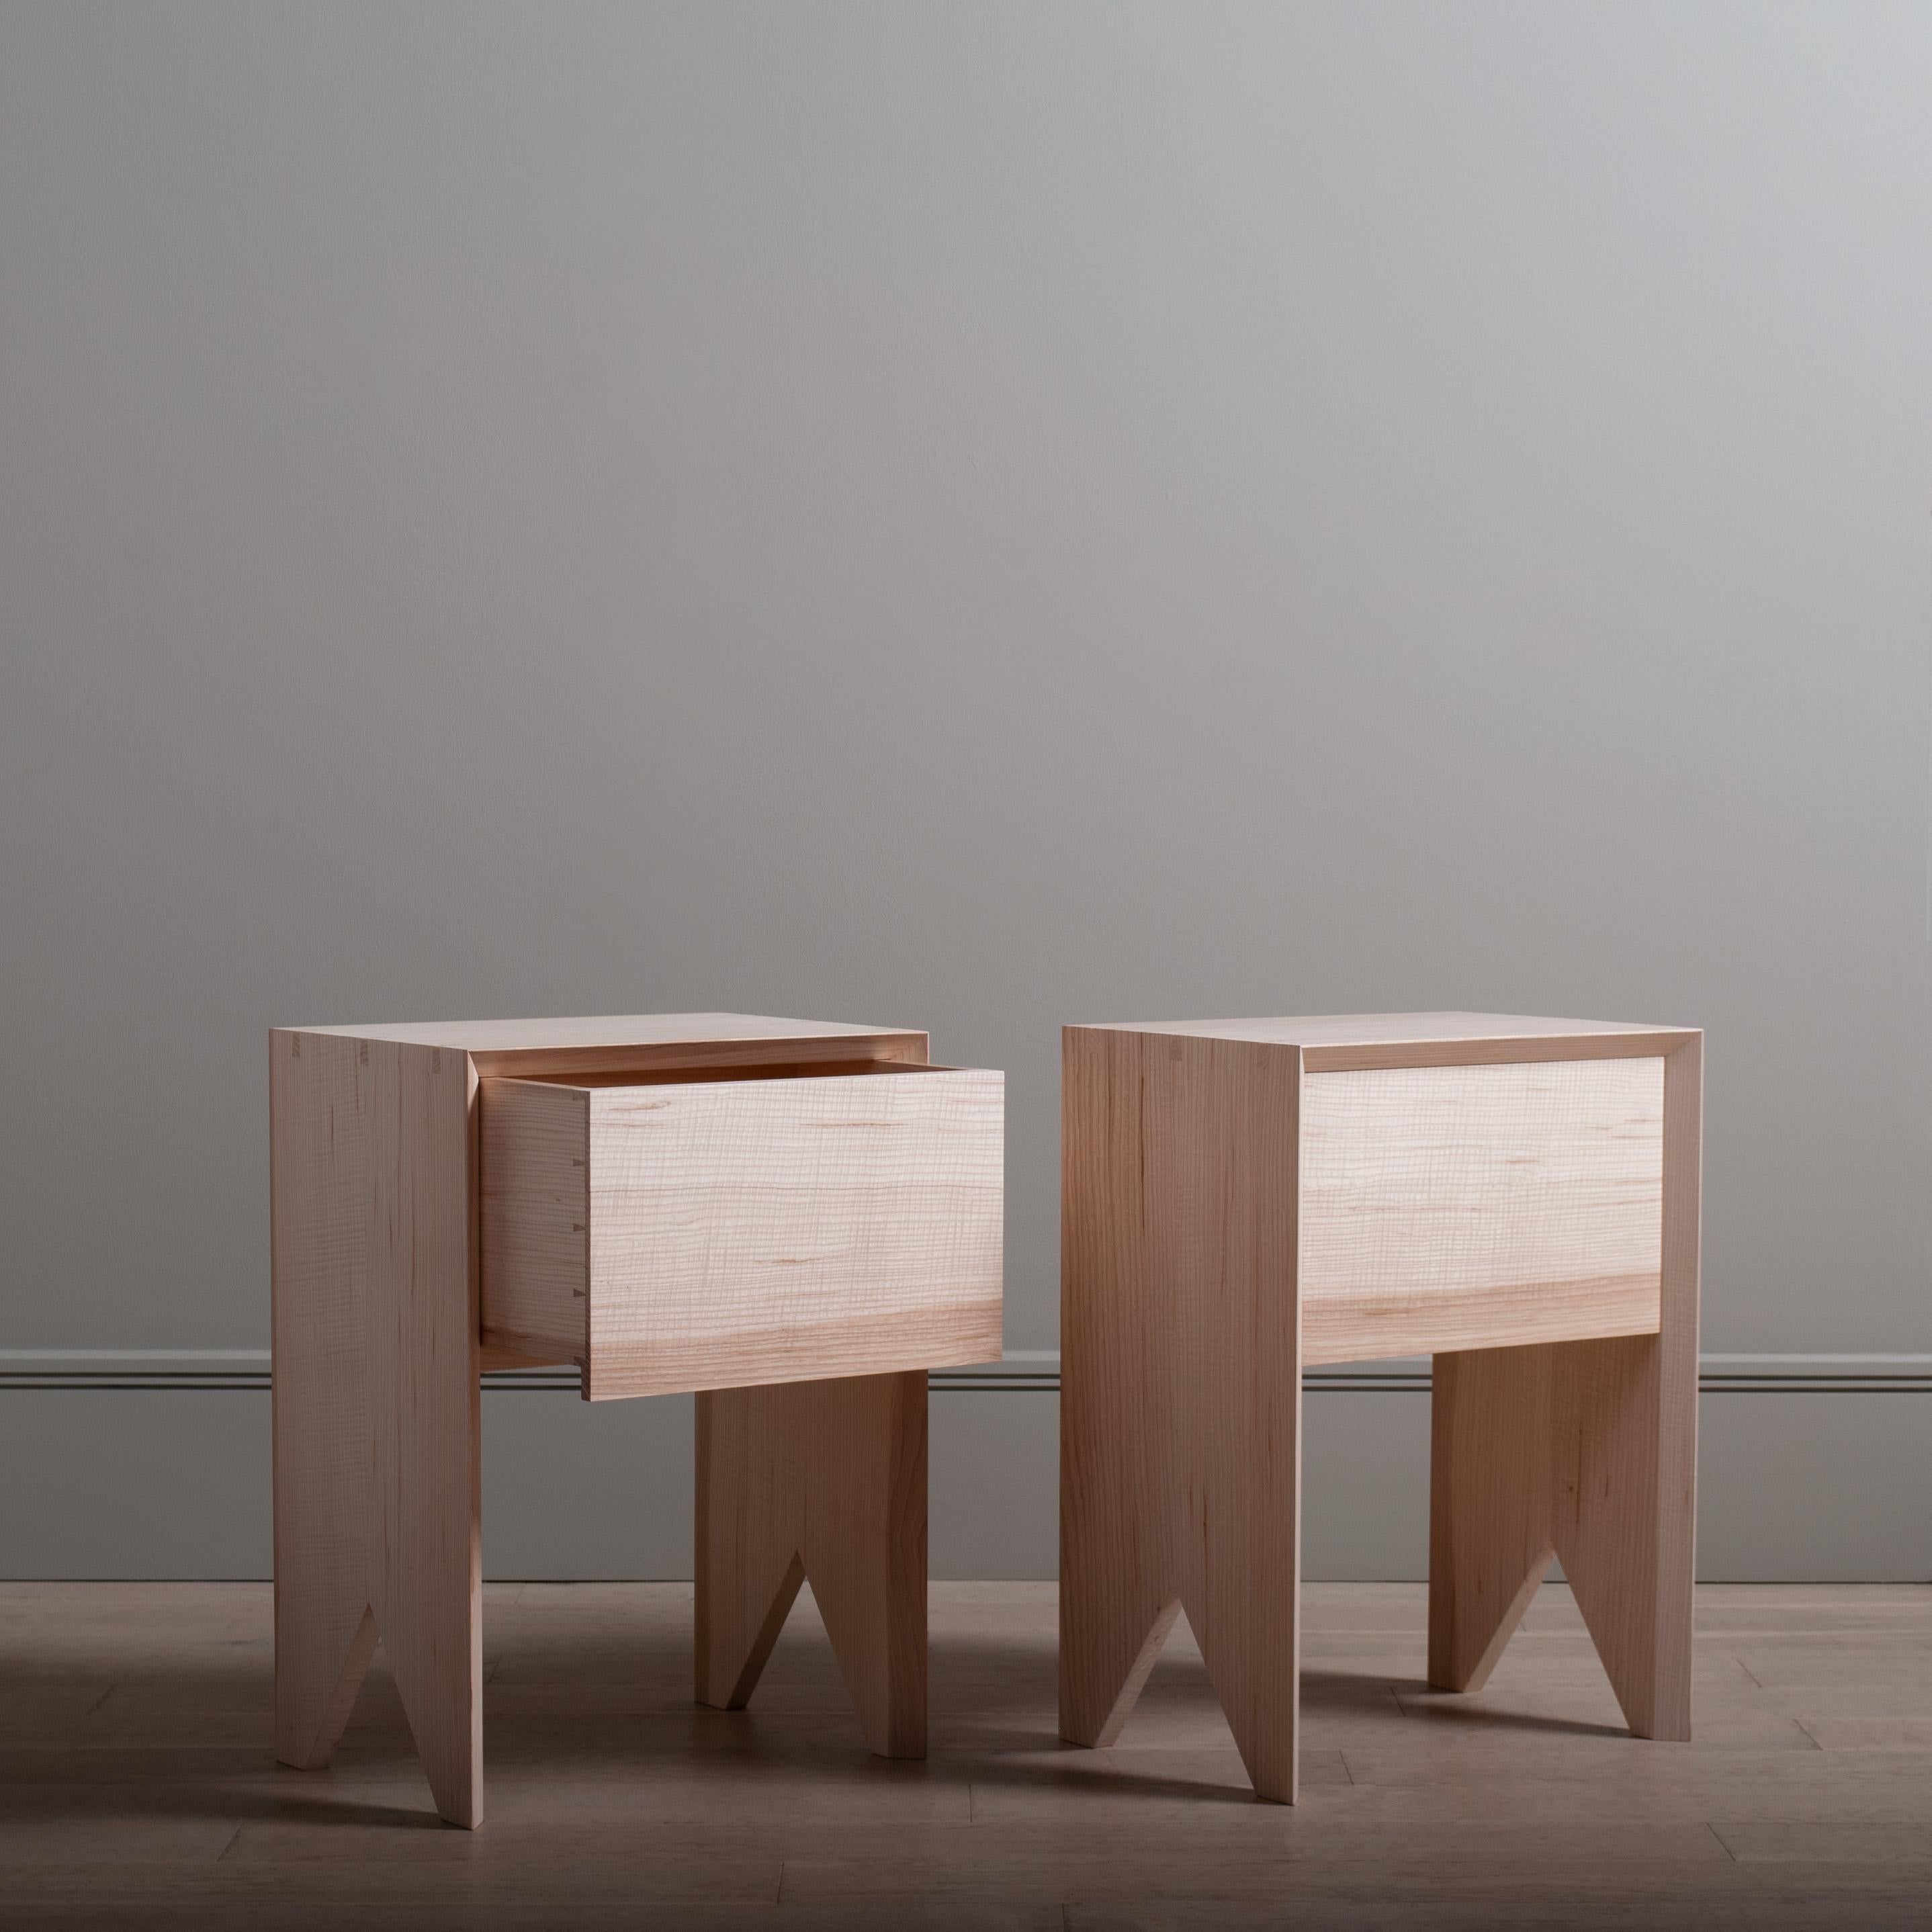 A pair of ultra sleek contemporary hand-crafted English 'Ripple' ash end tables with storage drawer. 
Designed with Asian minimalism in mind whilst highlighting the handmade construction details with exposed mitred key dovetail jointing. The strict